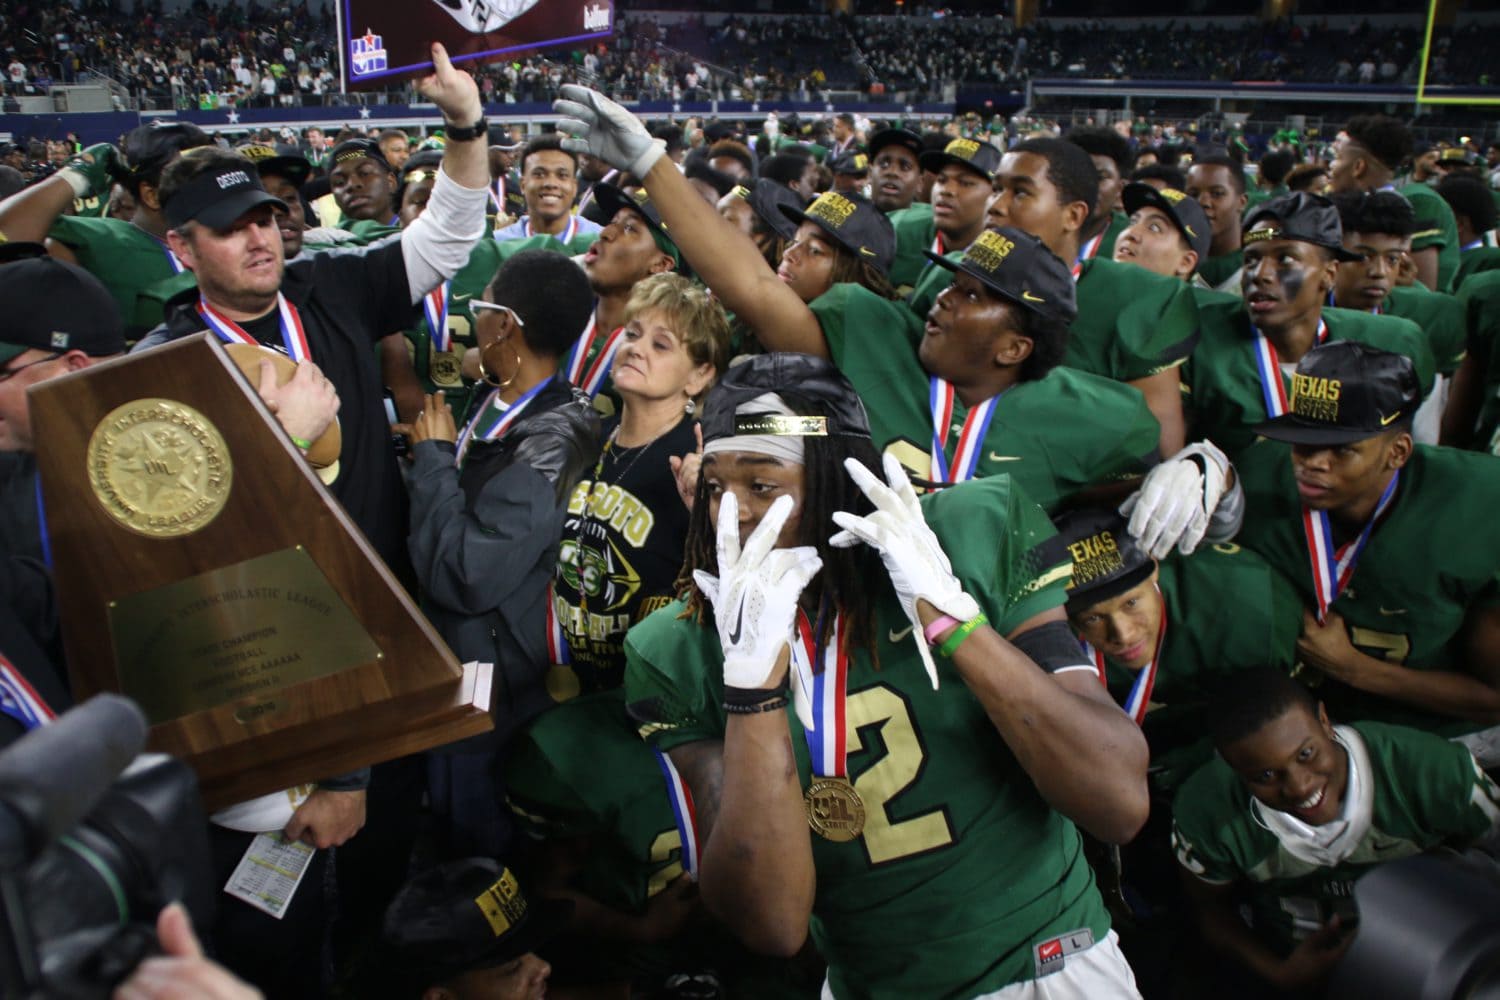 DeSoto State Champions, Eagles Win First State Title Focus Daily News